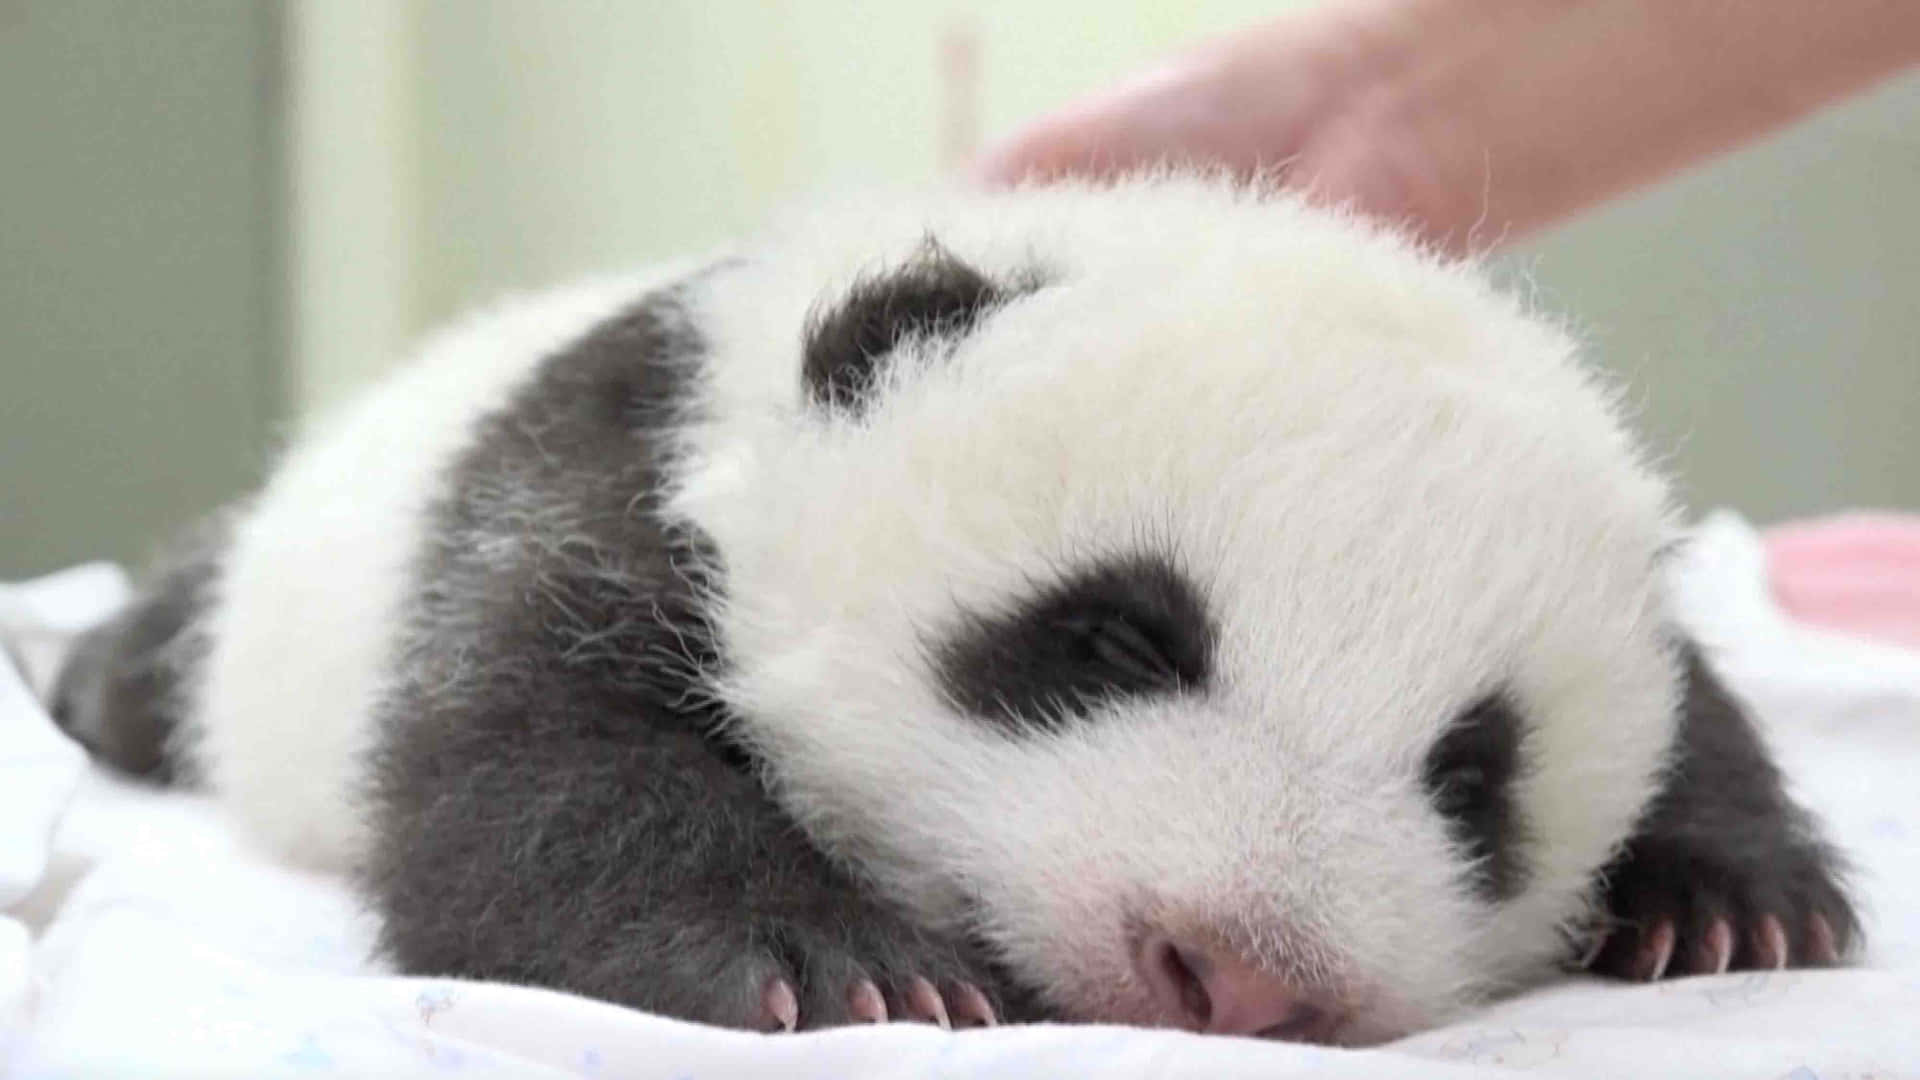 A Panda Cub Is Being Held By A Person